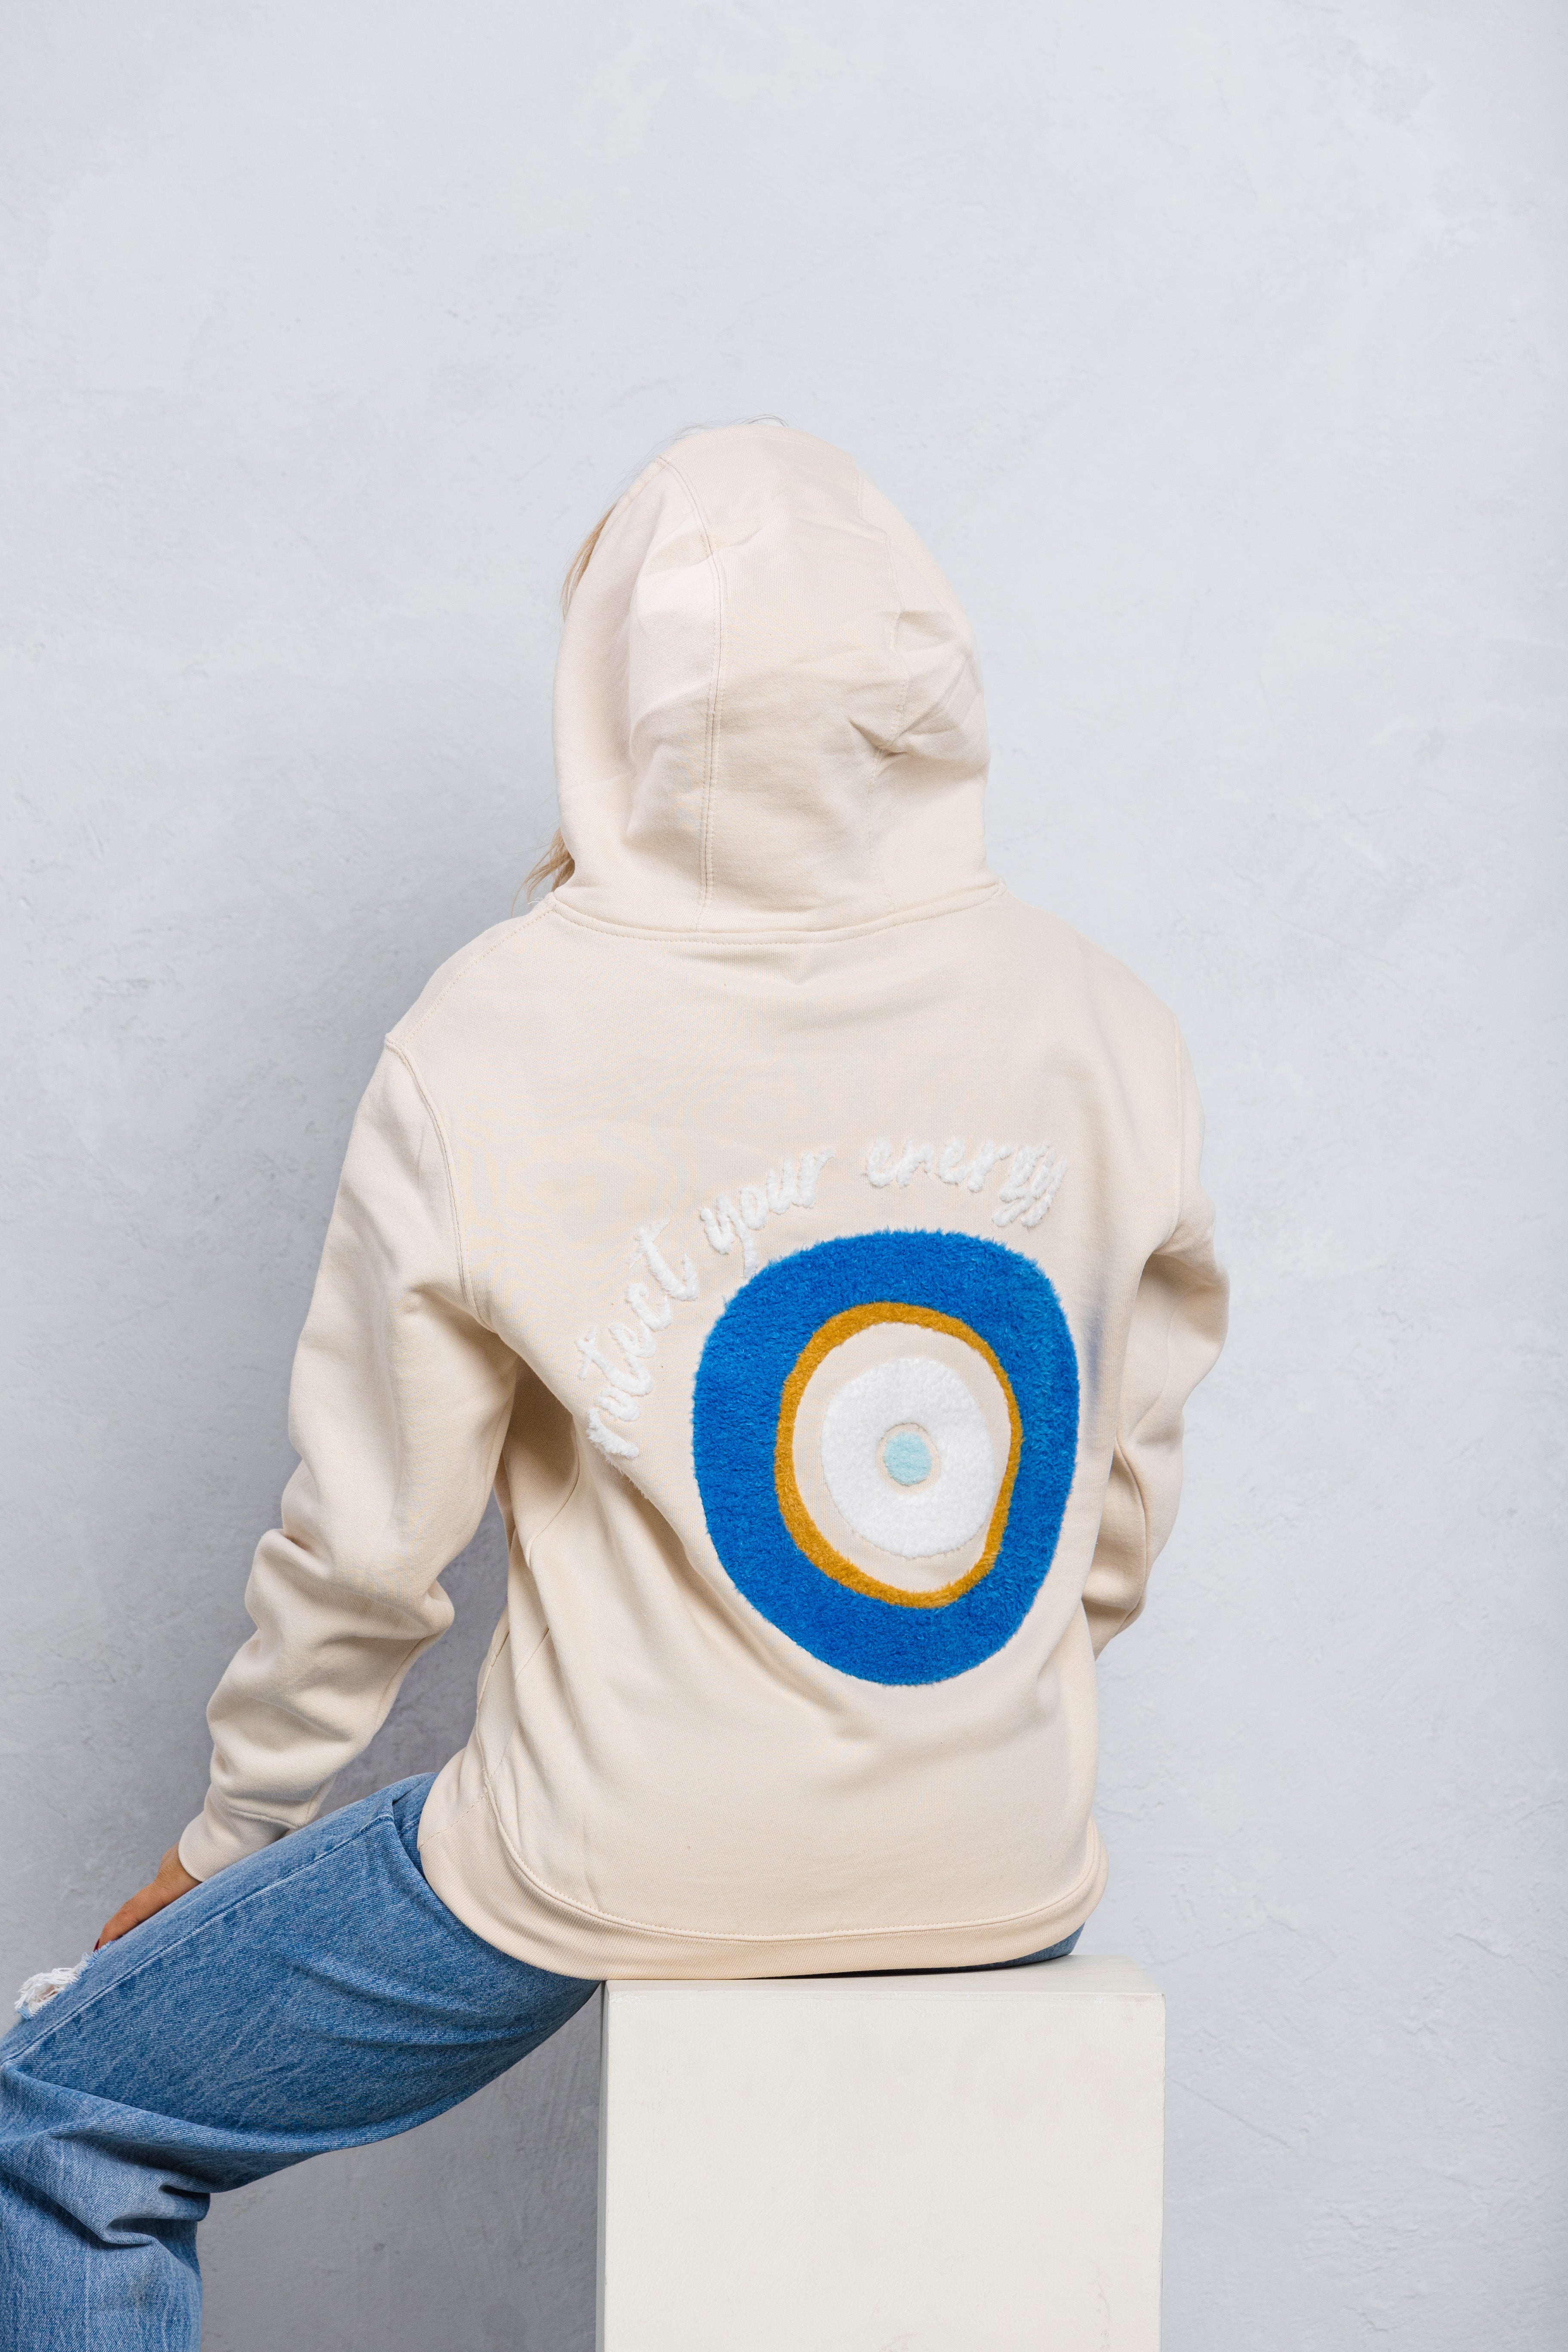 PROTECT YOUR ENERGY Hoodie